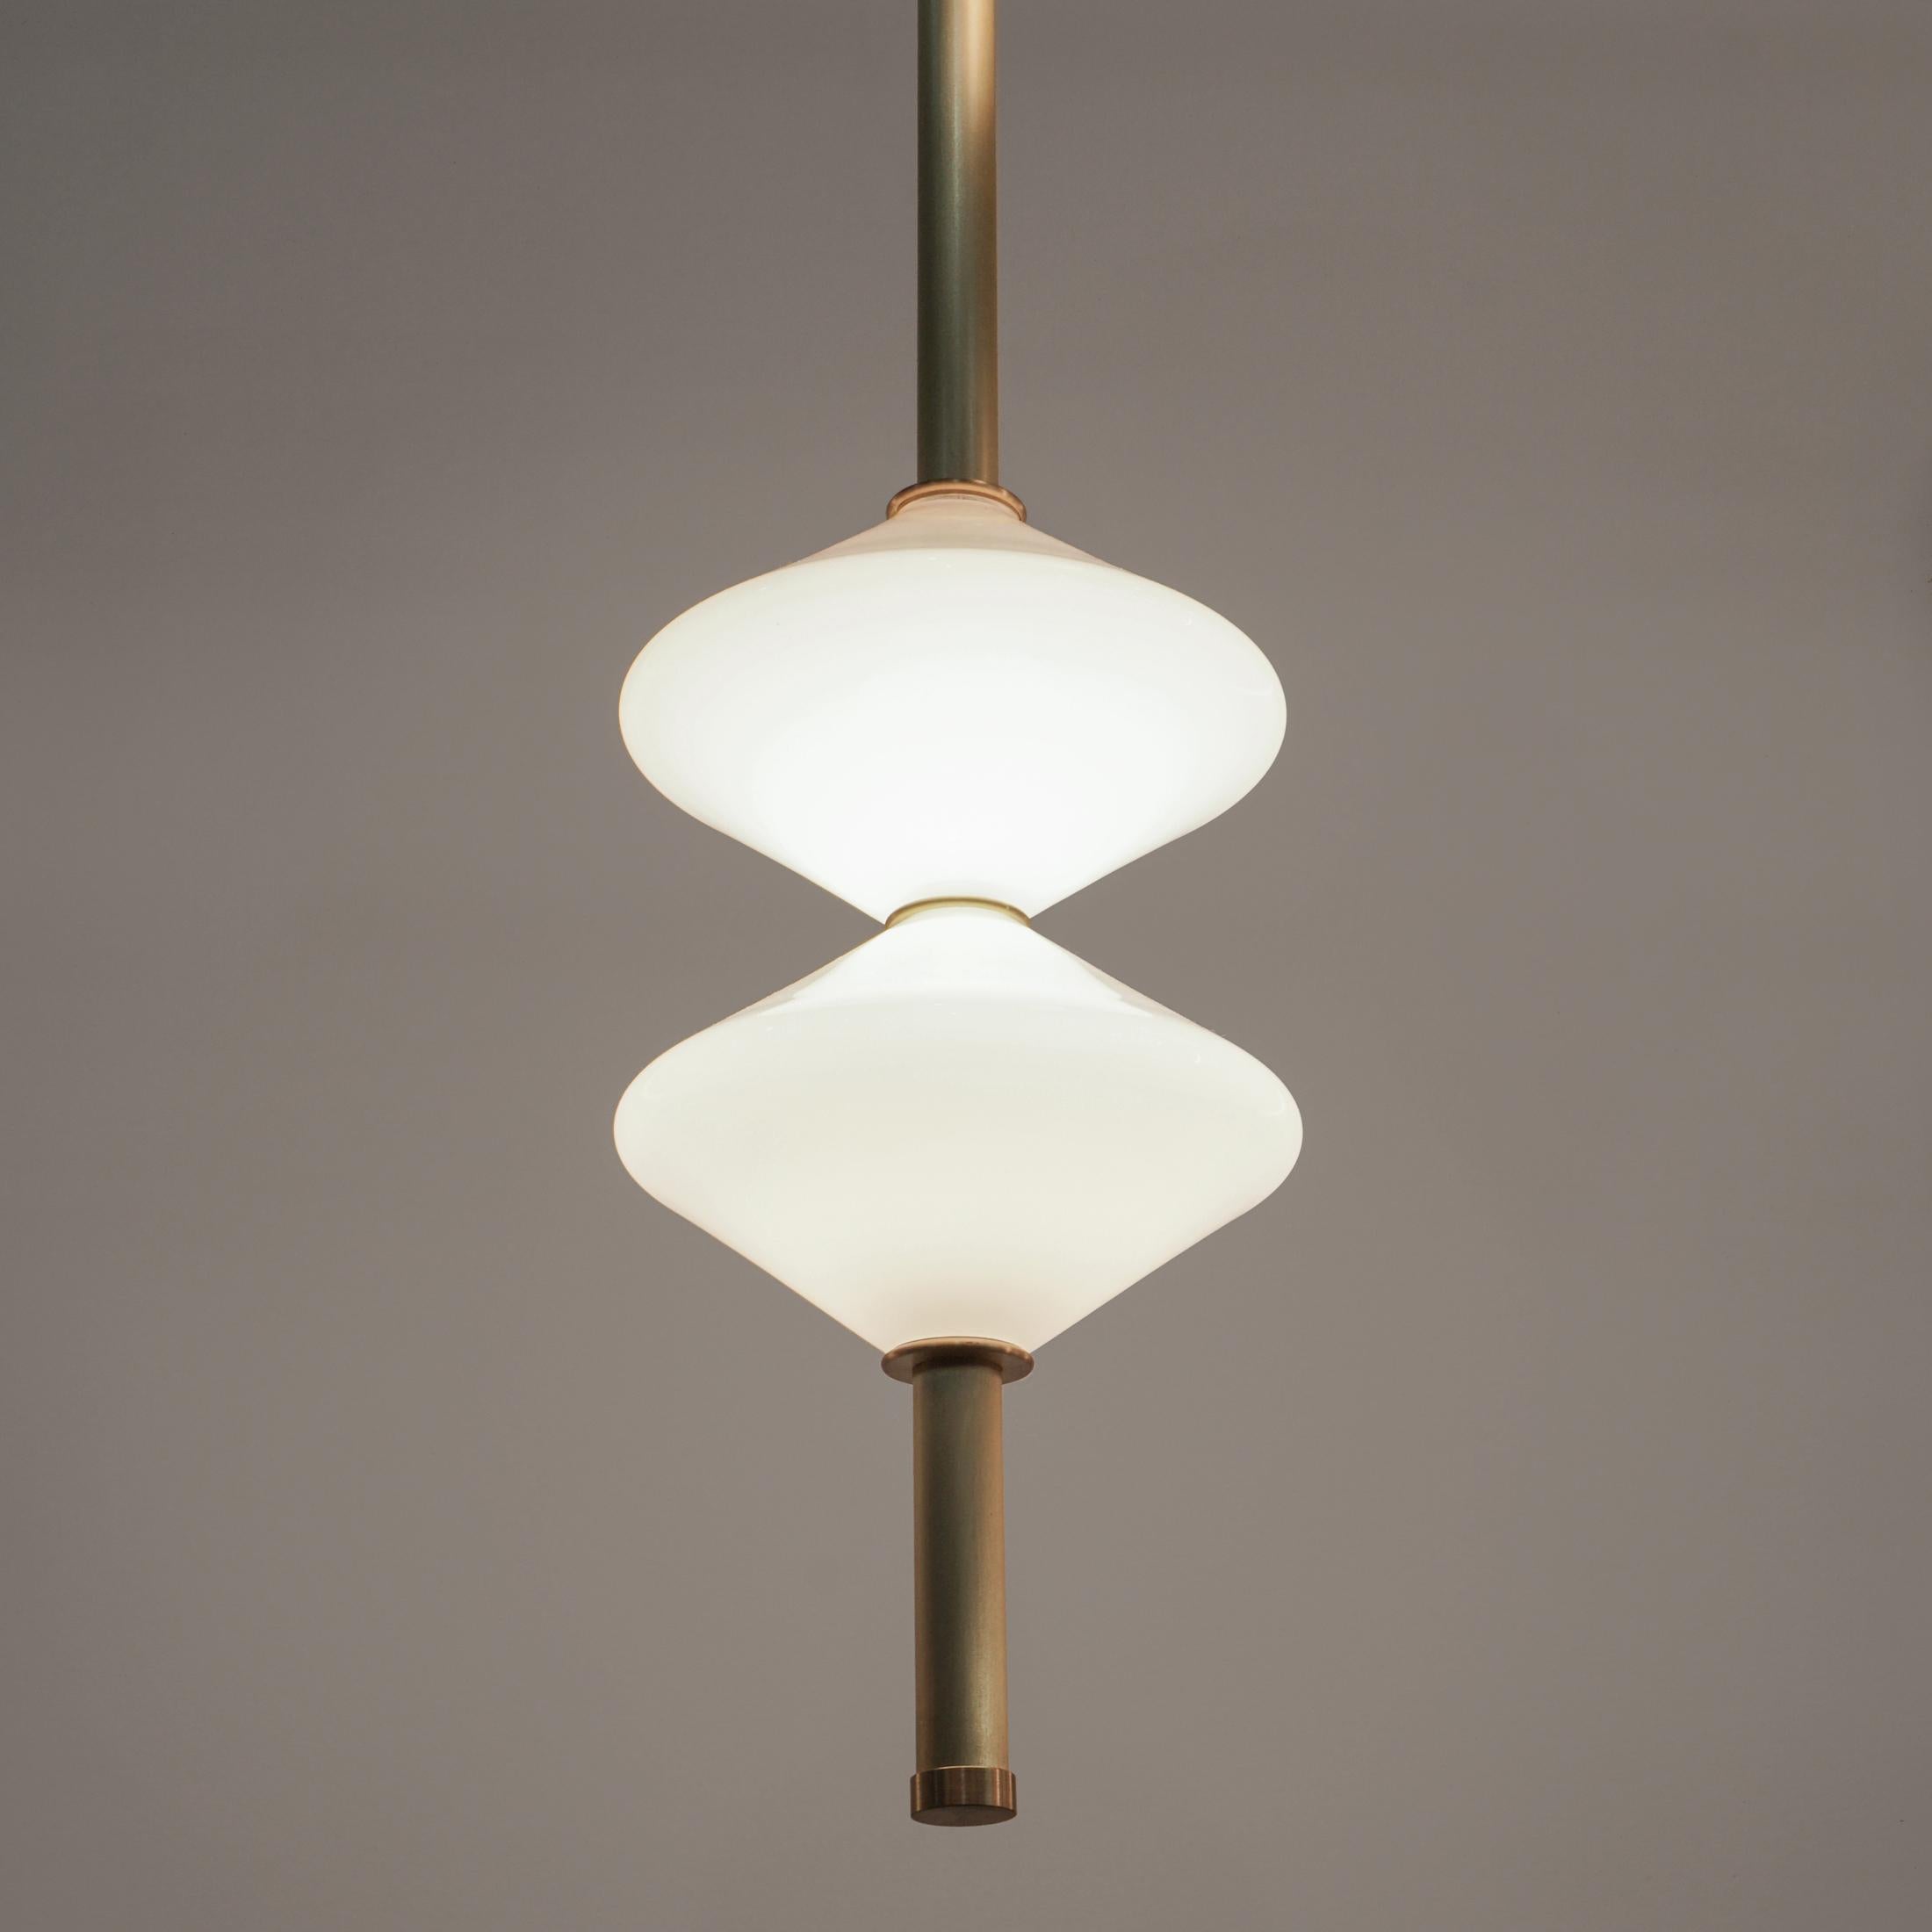 The GEM 2 Vertical Pendant is built of brass with an LED light source that is diffused by a hand-blown opal white glass diffuser. This pendant works as an individual fixture or can be installed in larger groupings to create a dynamic installation.